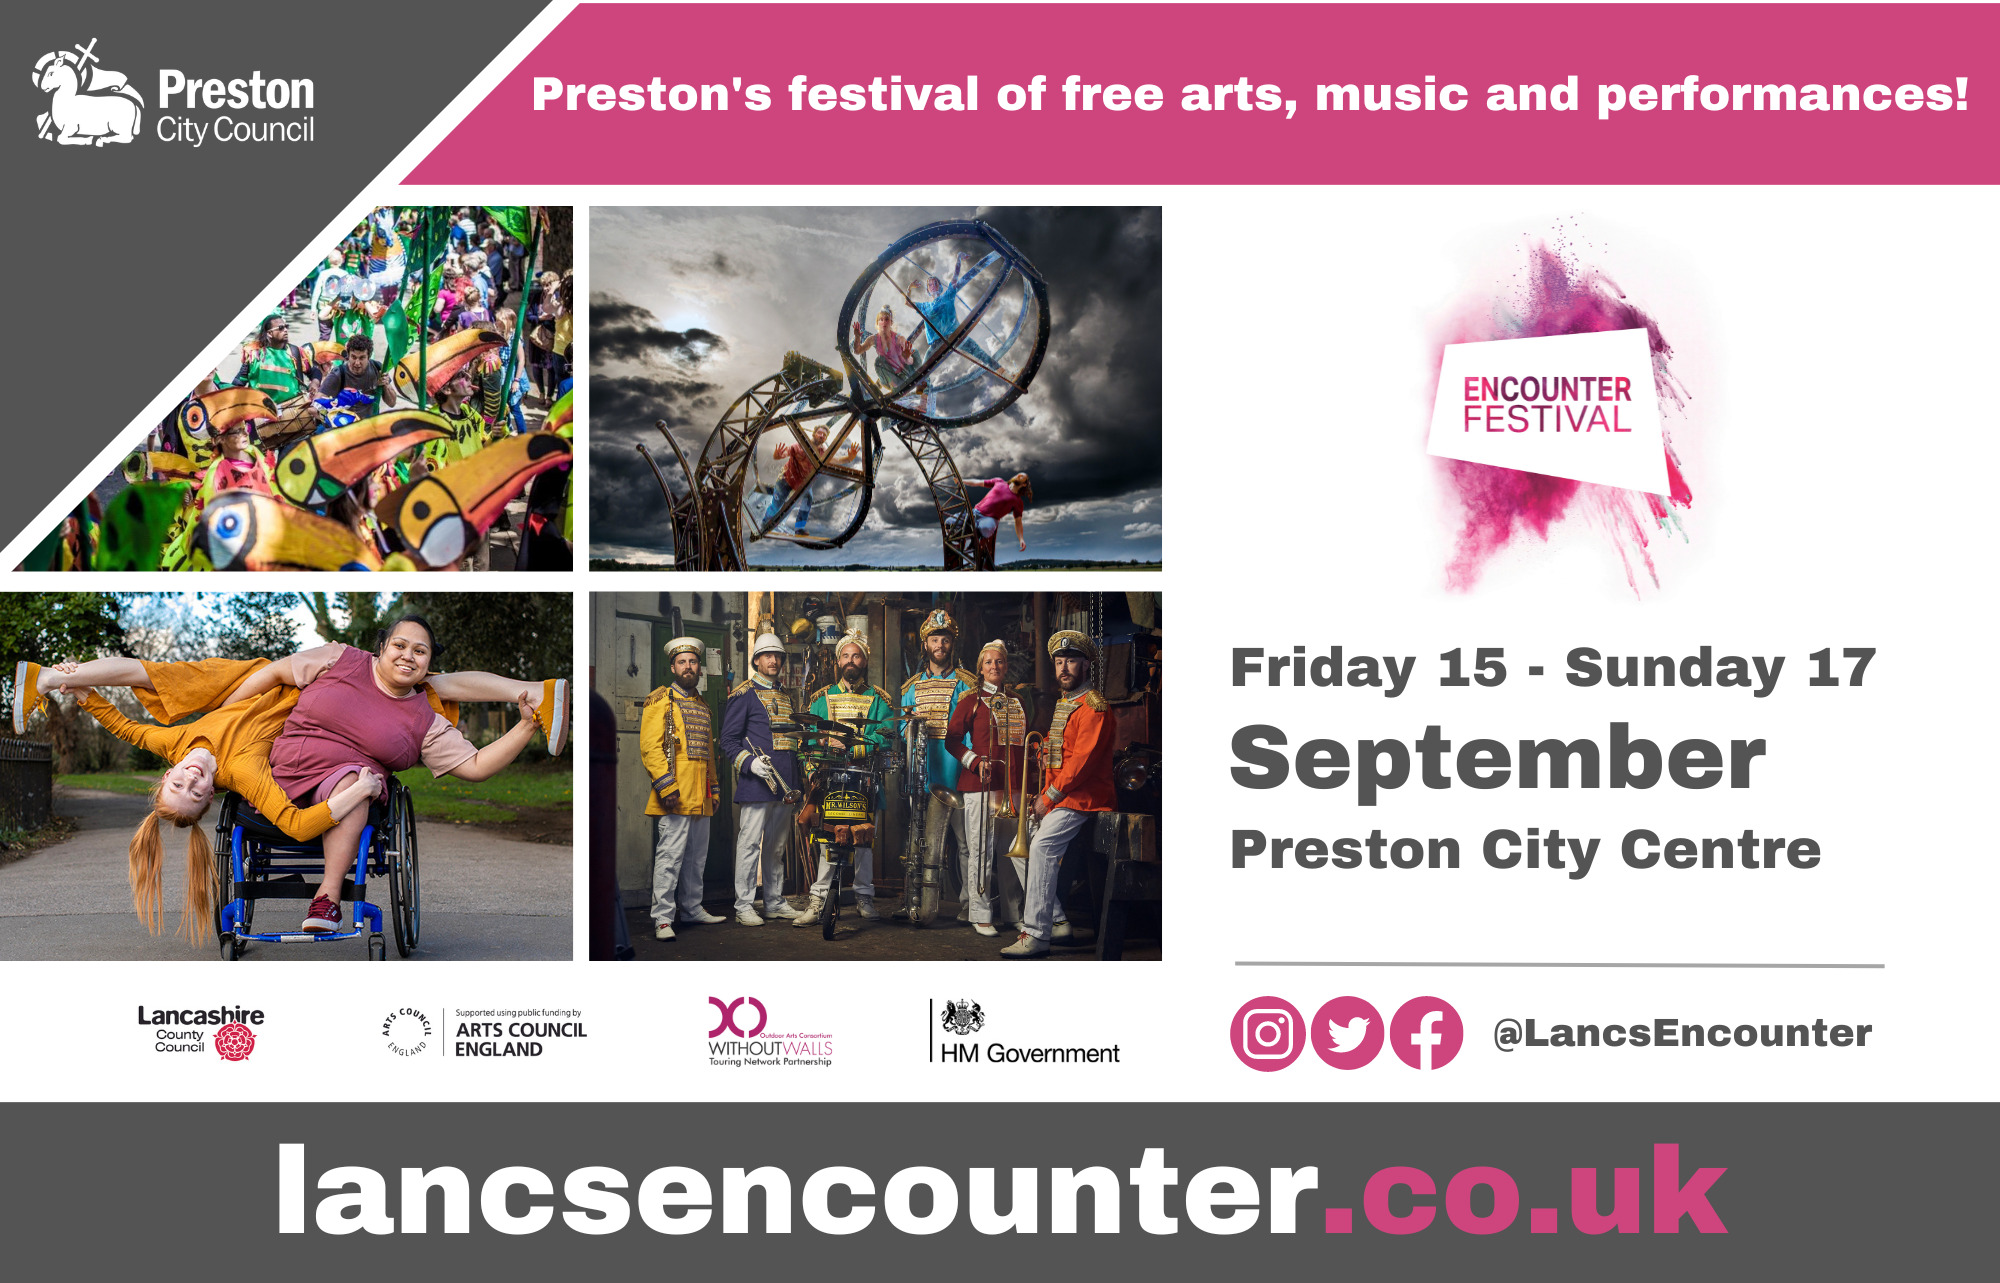 Encounter Festival Poster with performances highlighted.